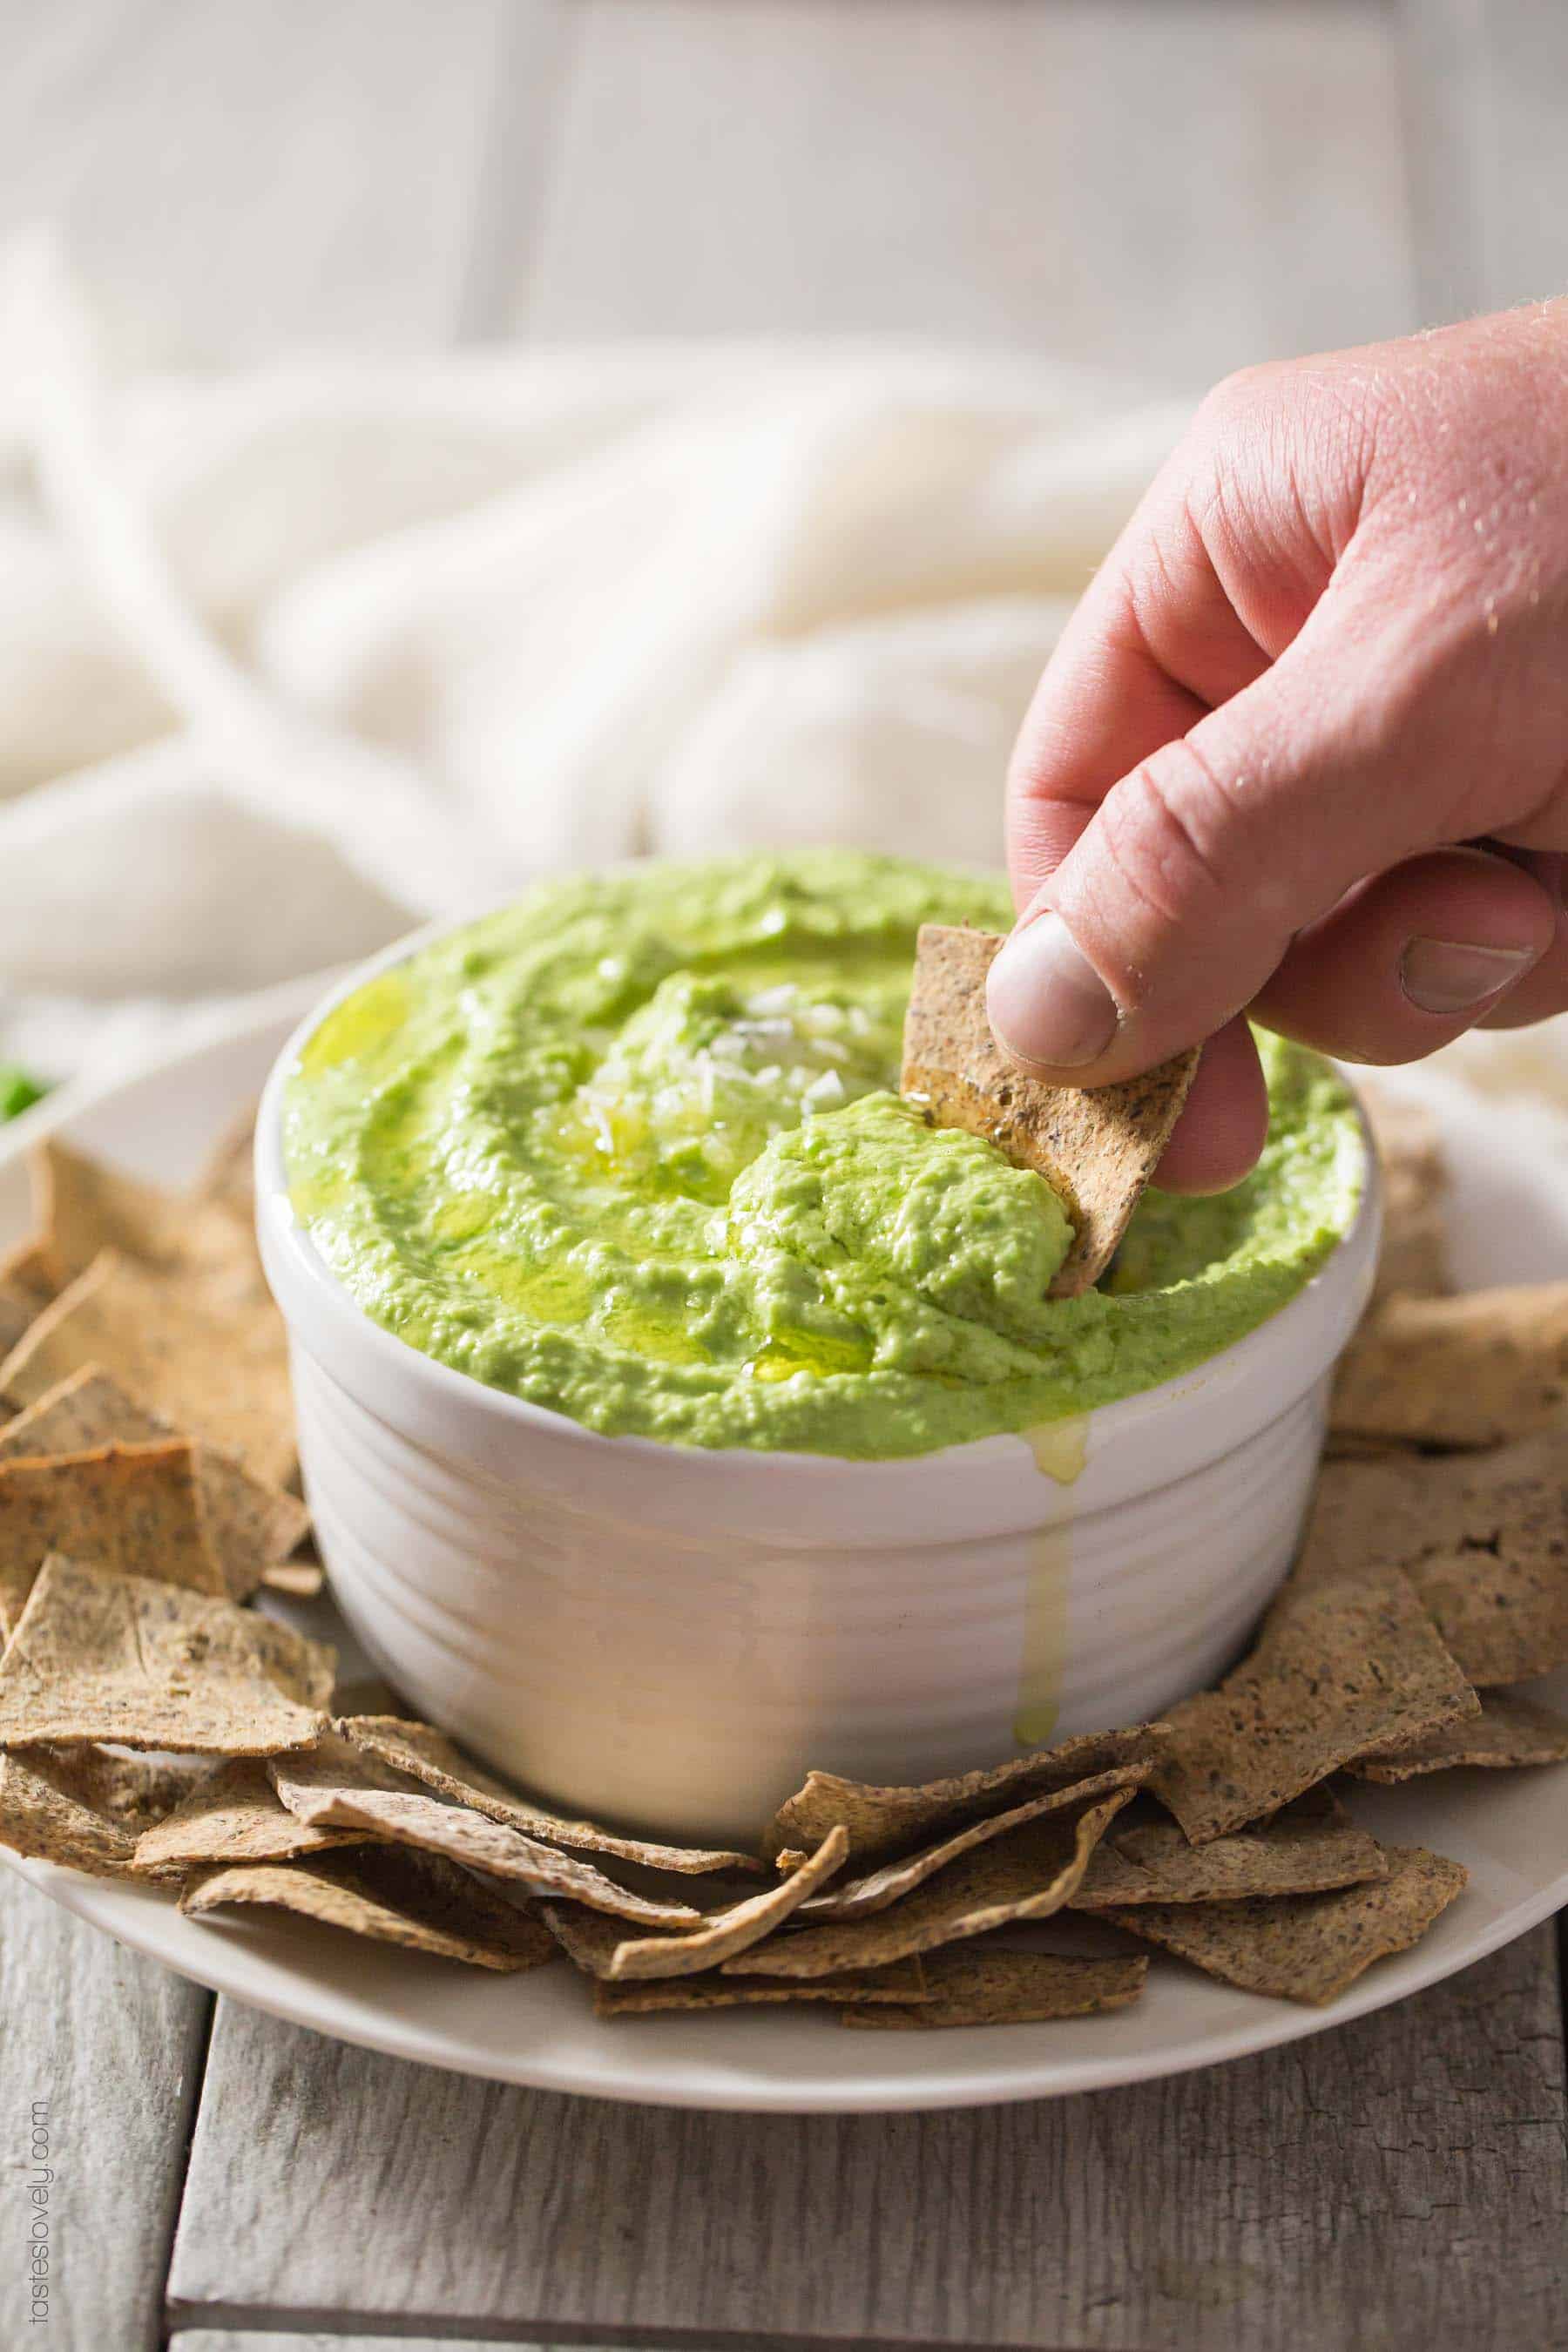 Paleo Sweet Pea No-Bean Hummus - a healthy spring appetizer served with my paleo almond pulp crackers. Paleo, gluten free, grain free, dairy free, sugar free.